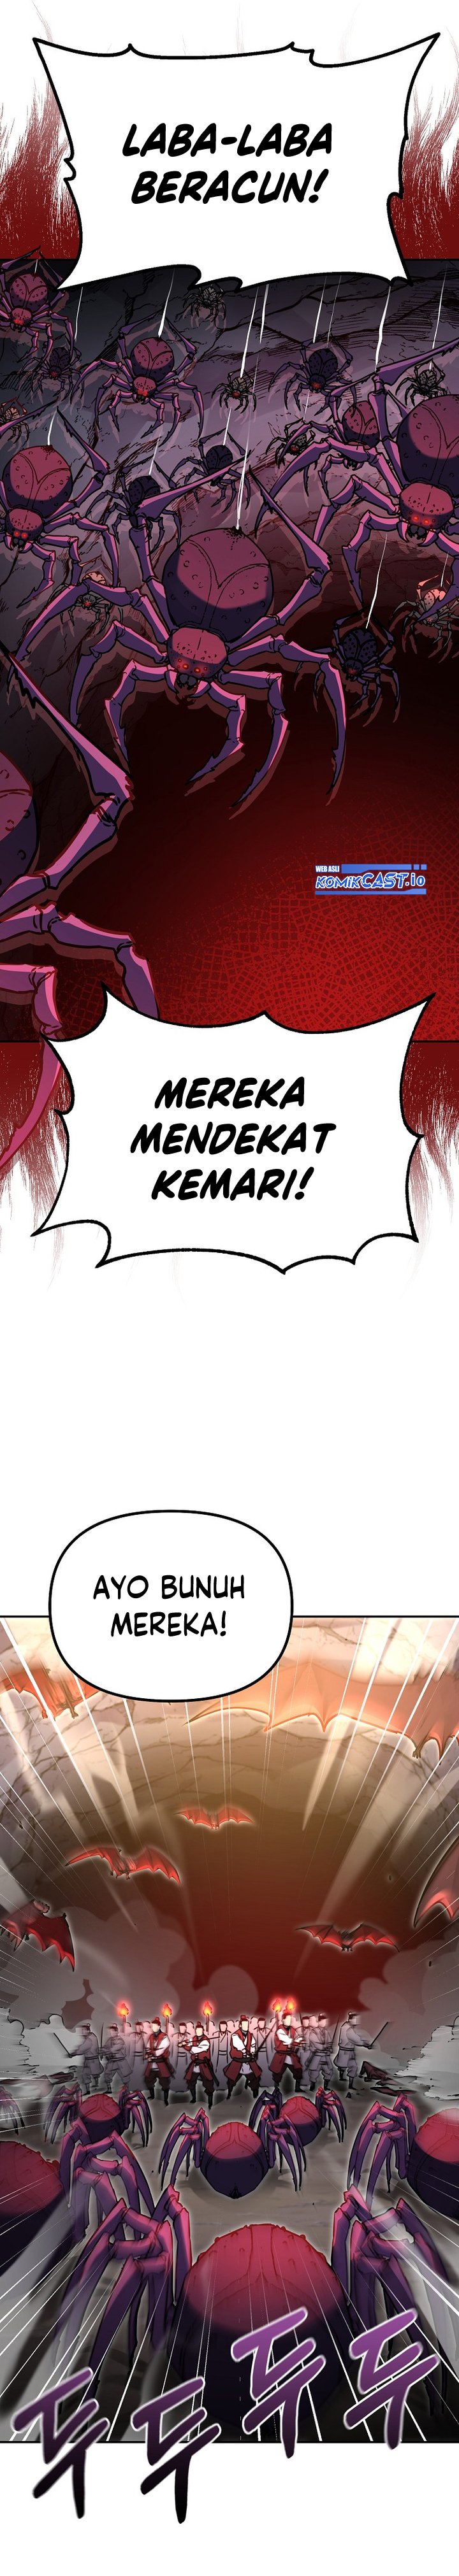 Reincarnation of the Murim Clan’s Former Ranker Chapter 92